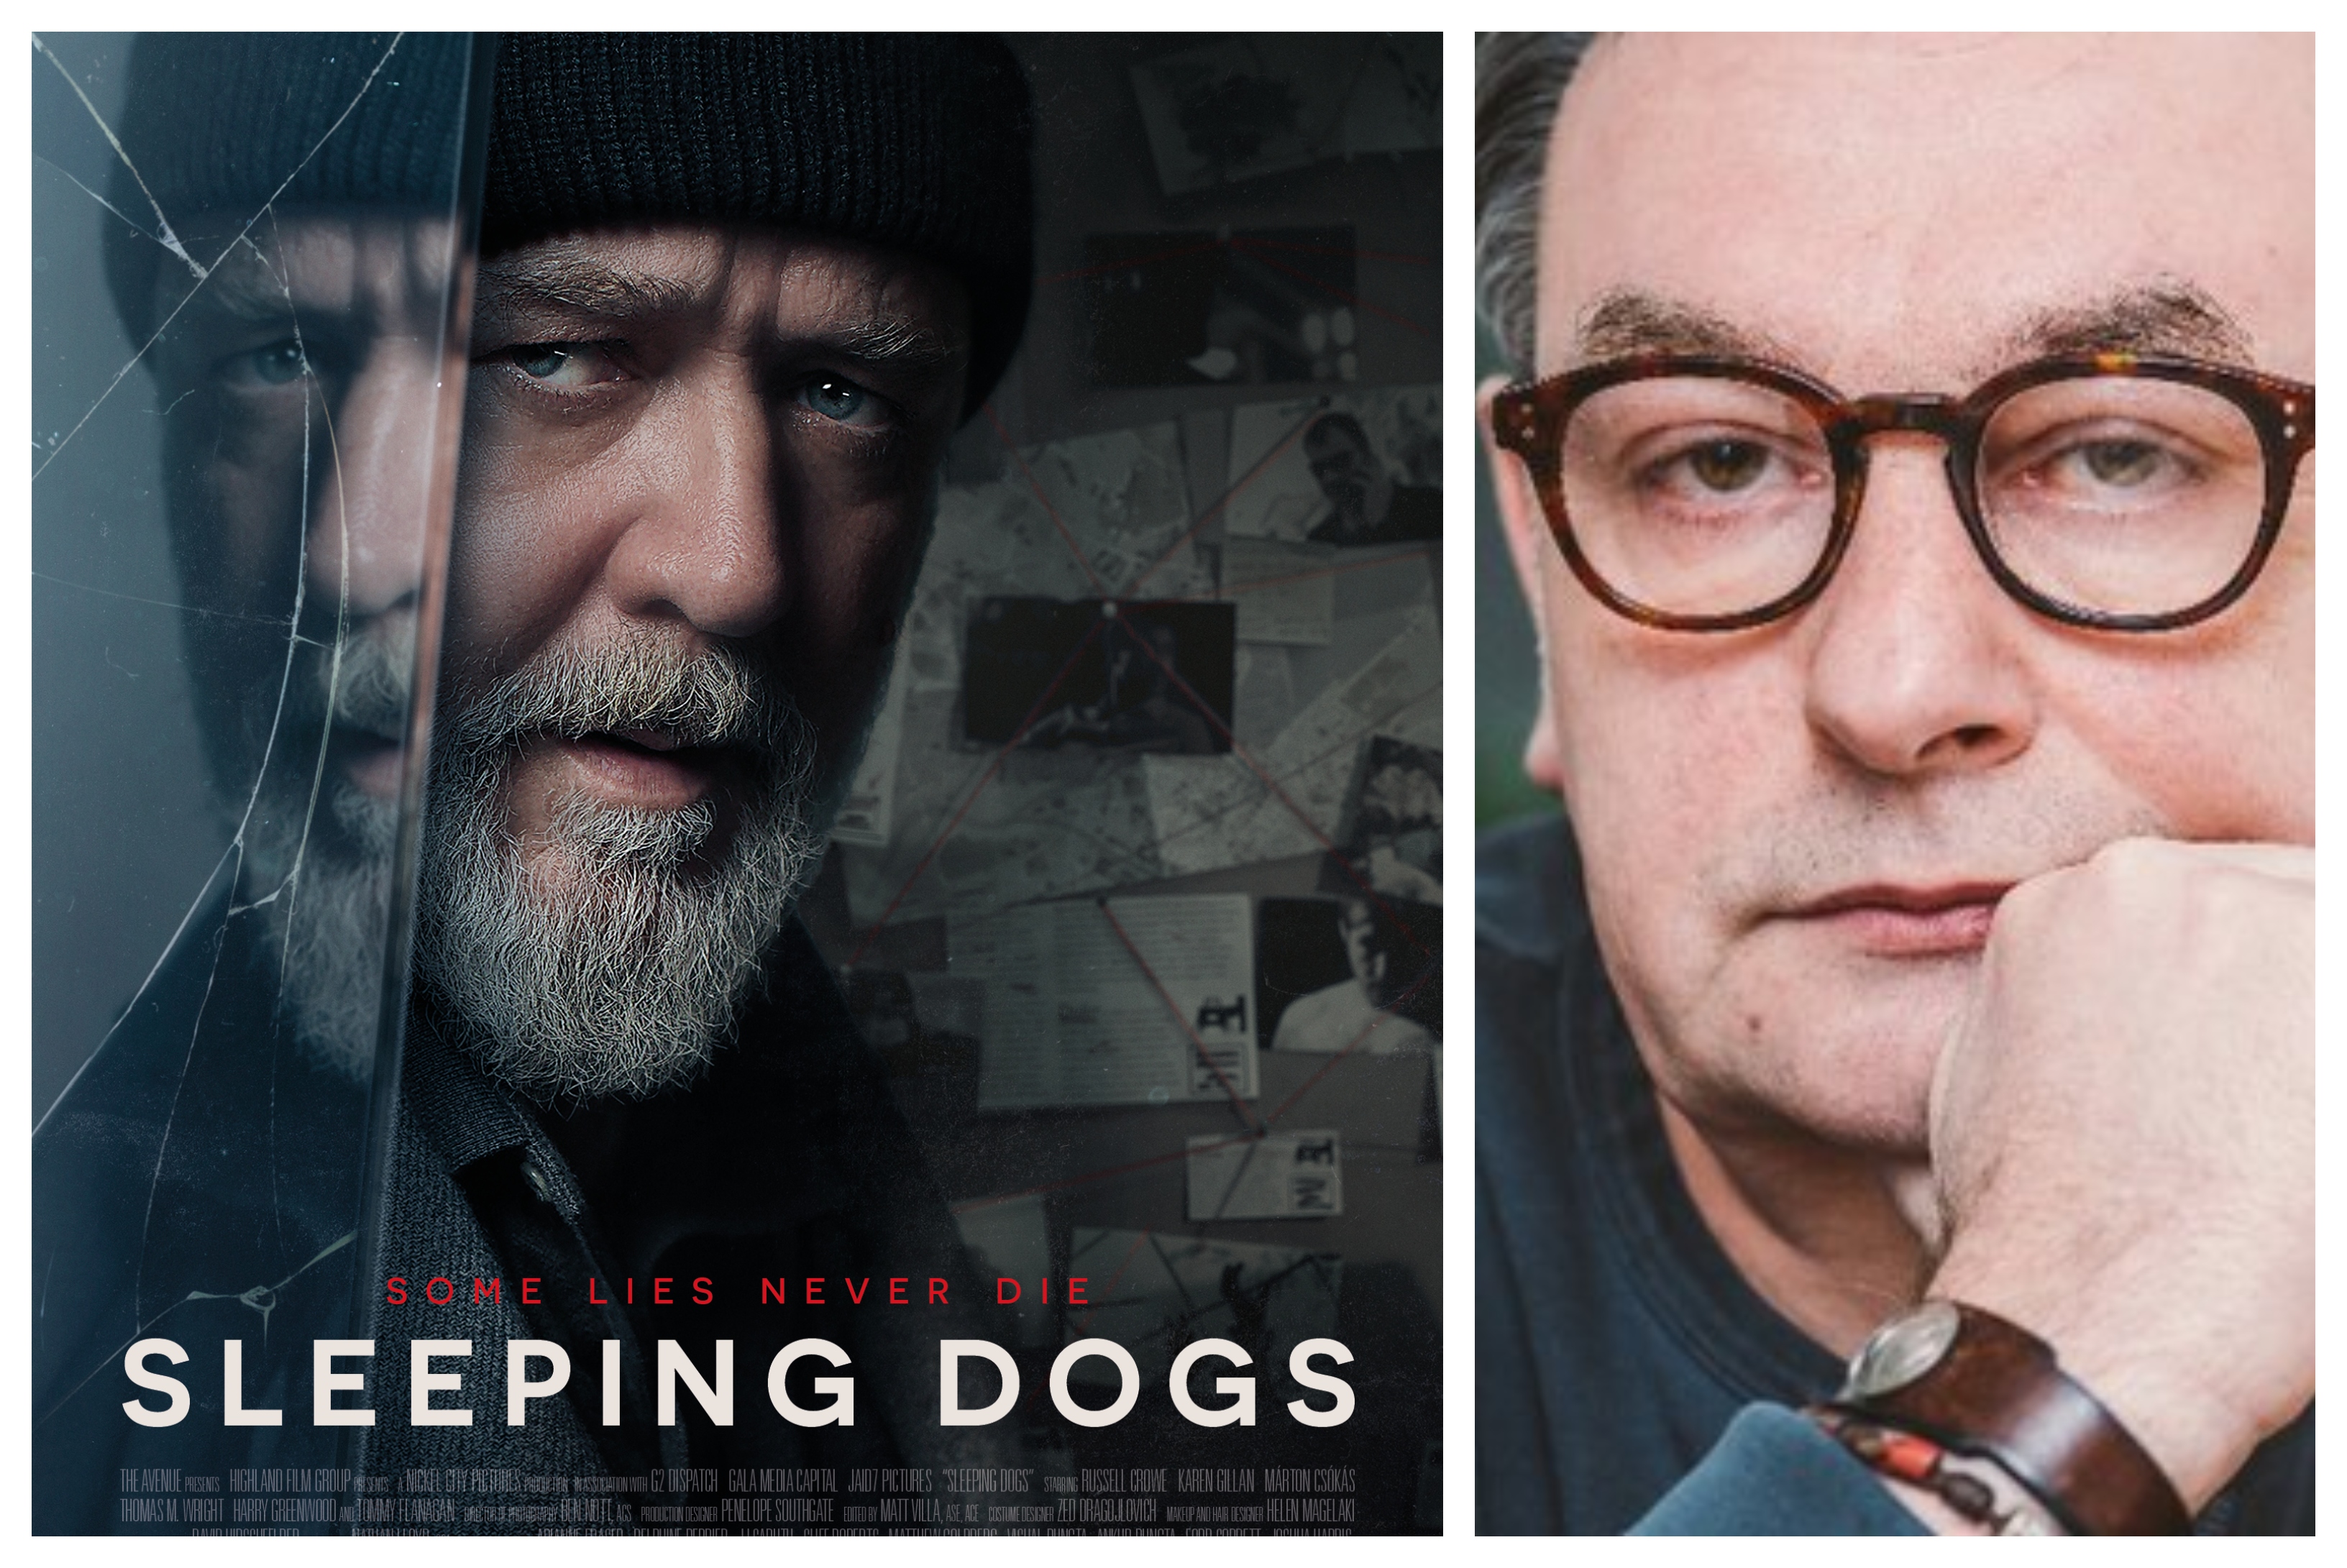 Sleeping Dogs: Russell Crowe stars in new movie based on book by Romanian author